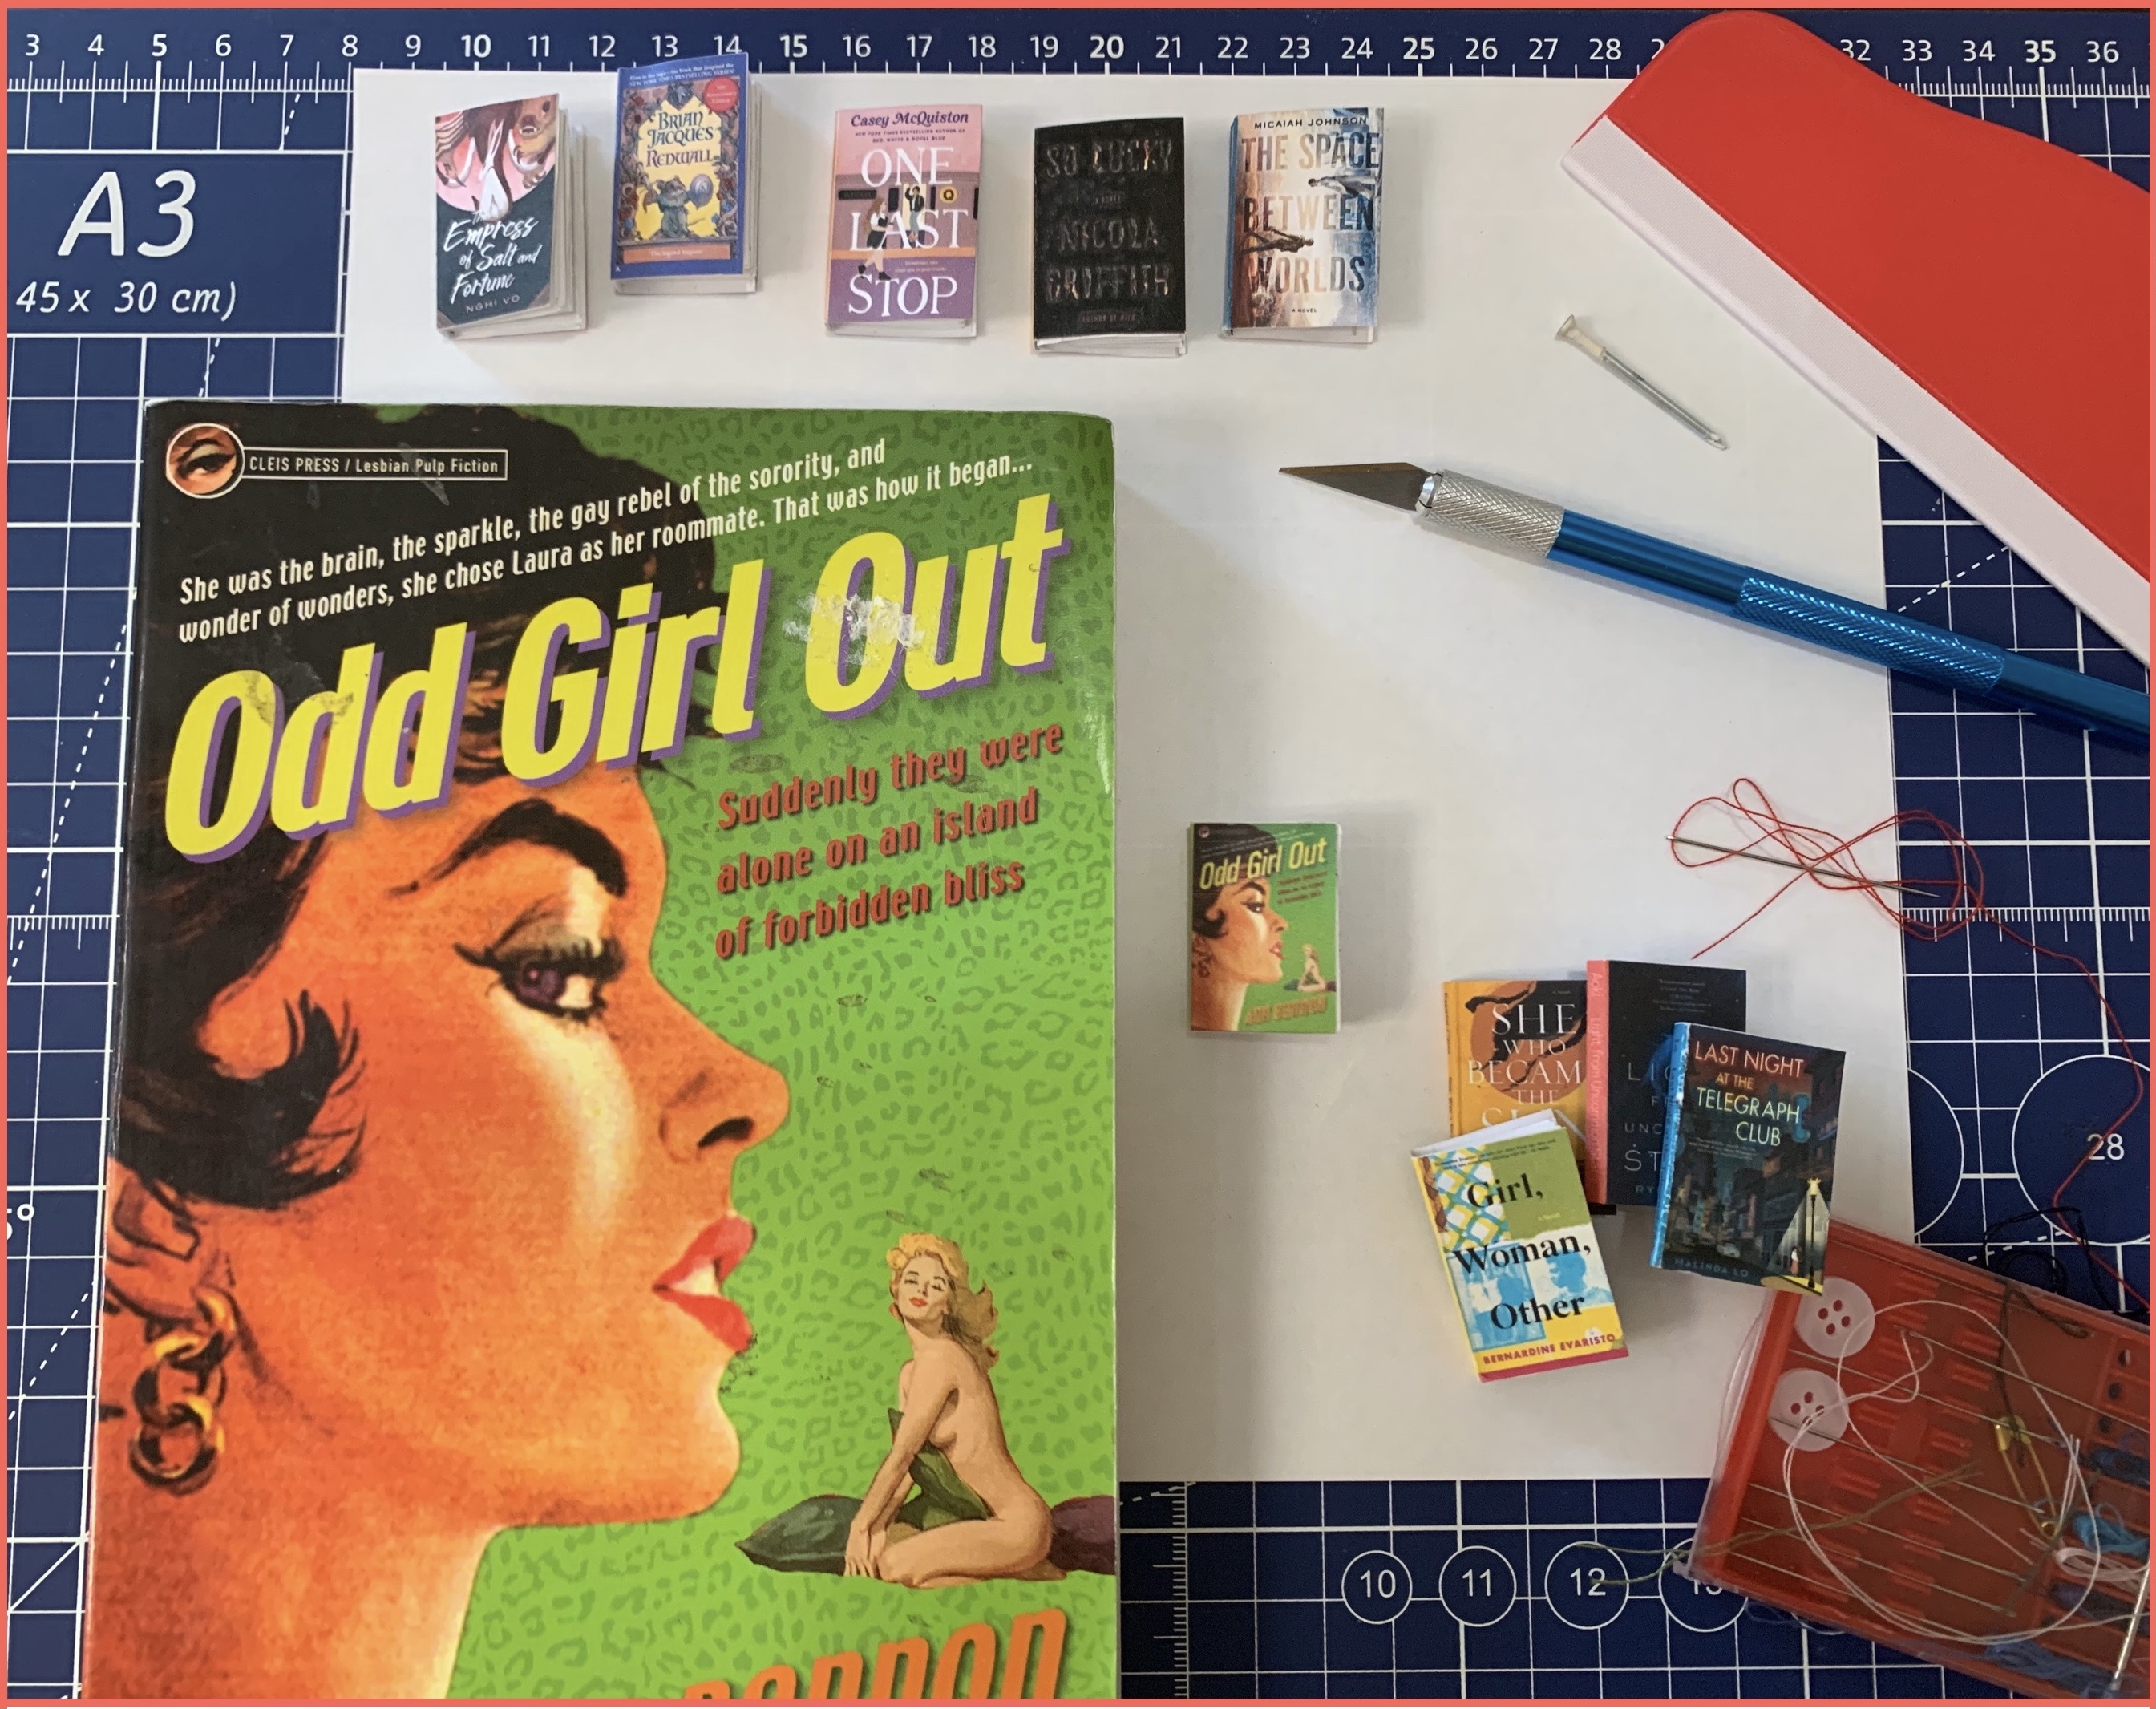 Assorted art supplies on a bright blue cutting mat.  Some tiny books and one normal sized book, a pulp fiction novel called Odd Girl Out.